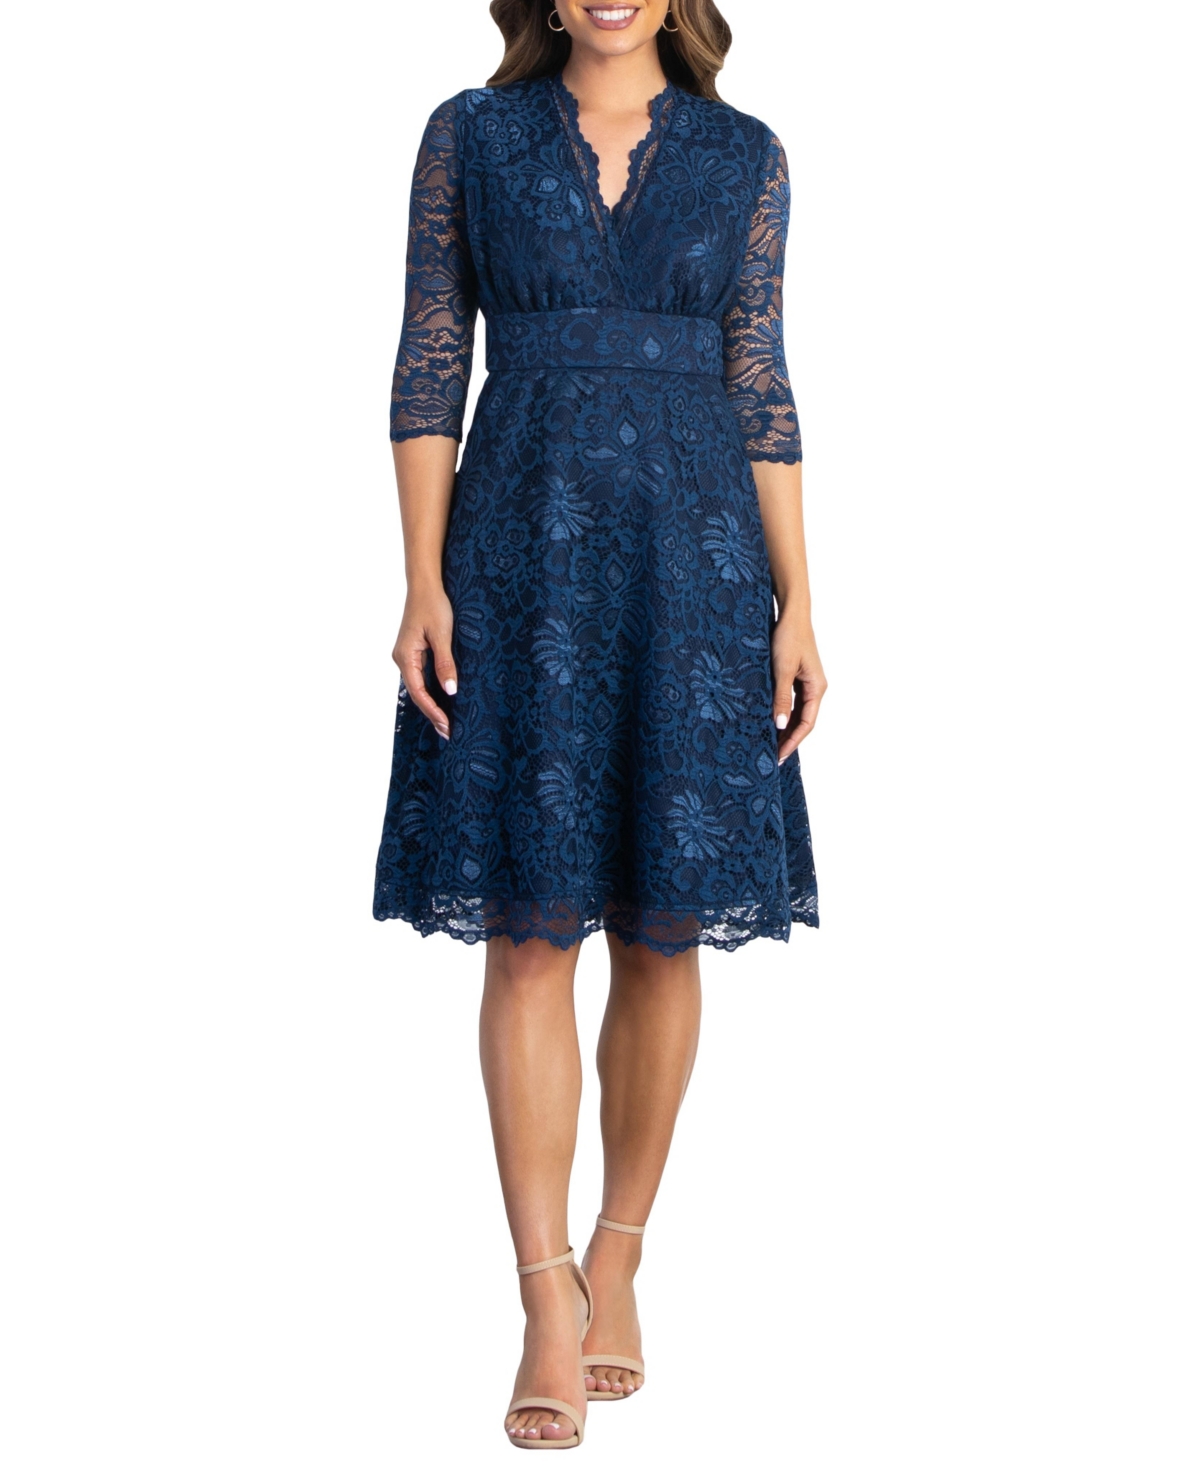 Women's Mademoiselle Lace Cocktail Dress with Sleeves - Berry bliss